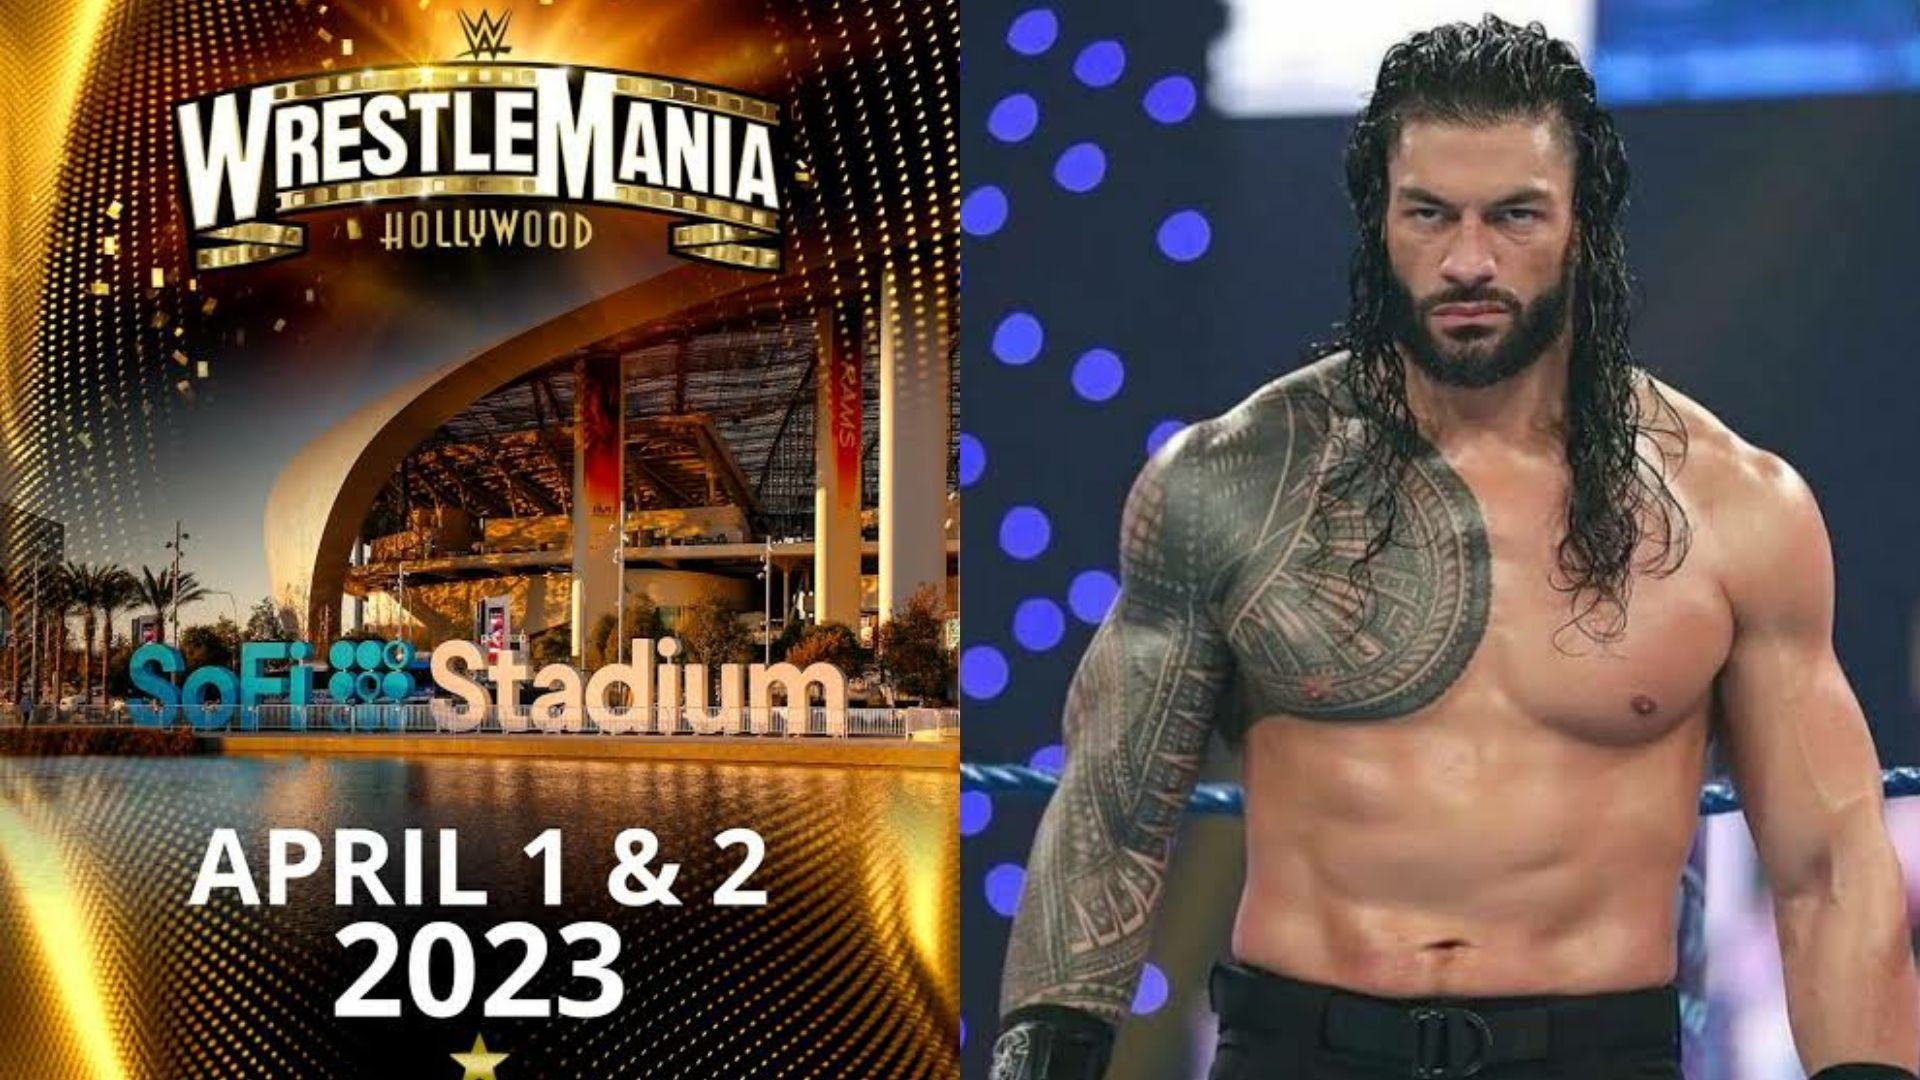 What will be the main event of WrestleMania 39?